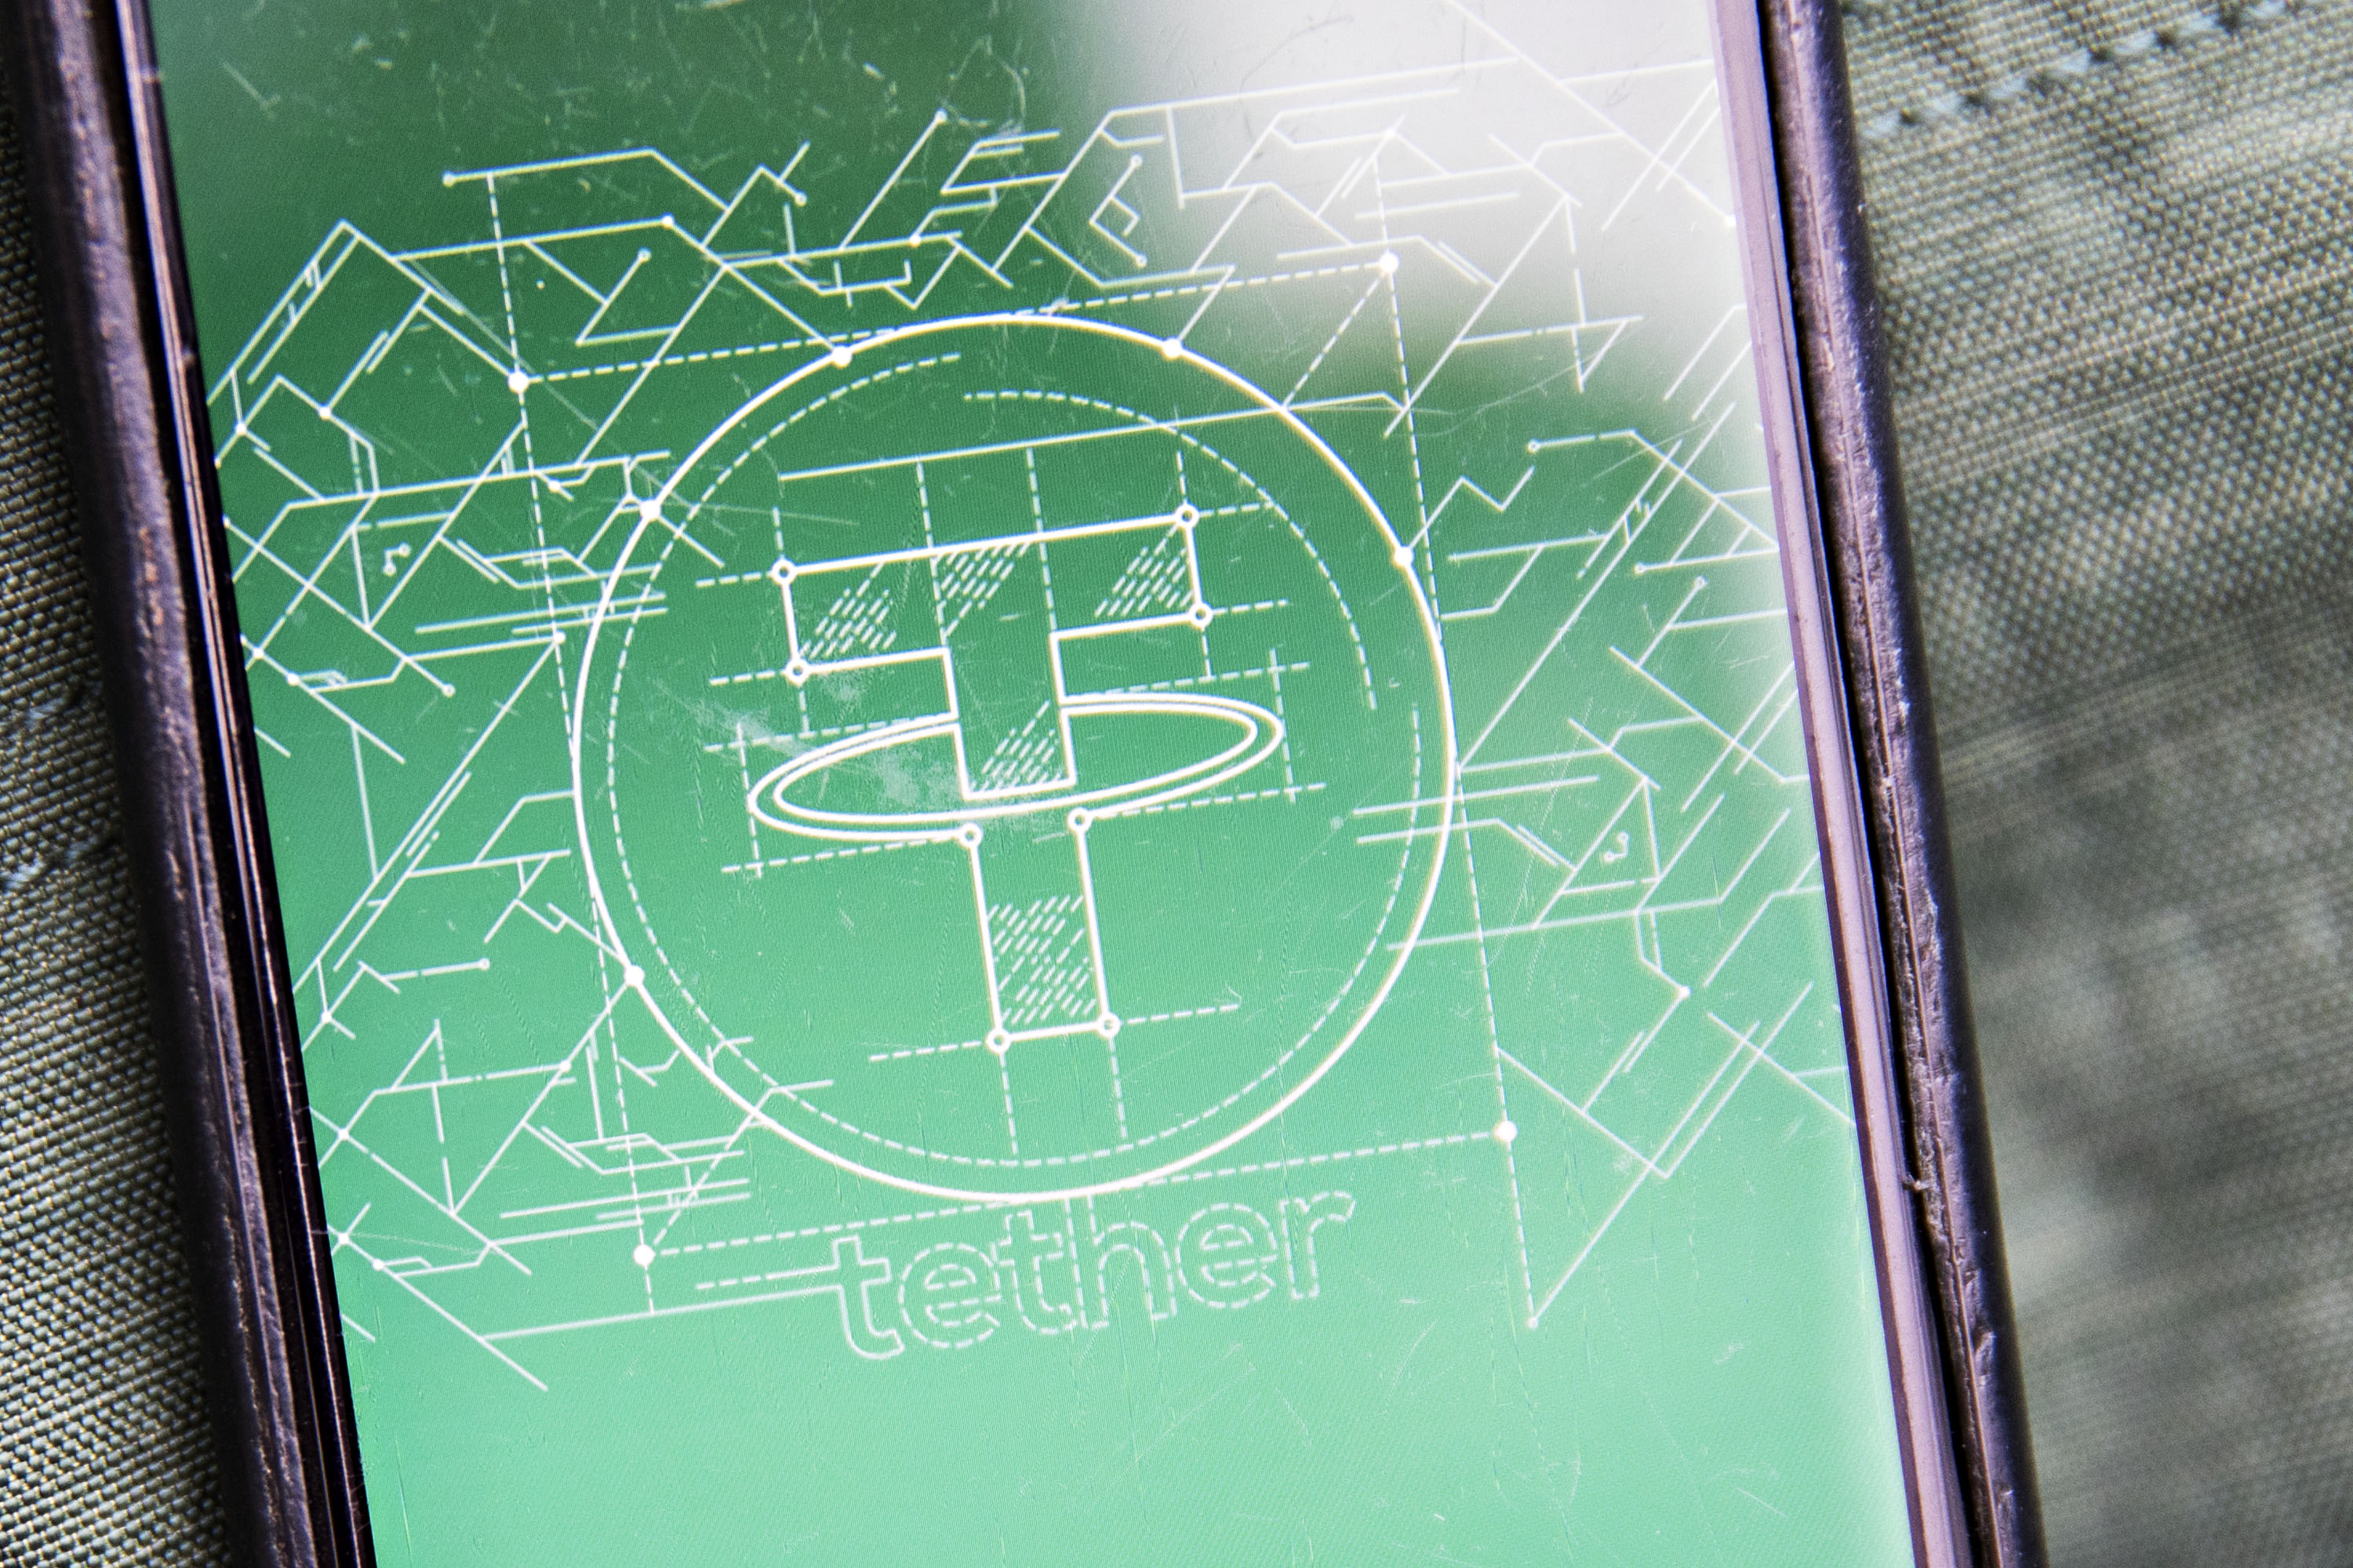 What is Tether? It’s Advantages and How It Affects Crypto Market